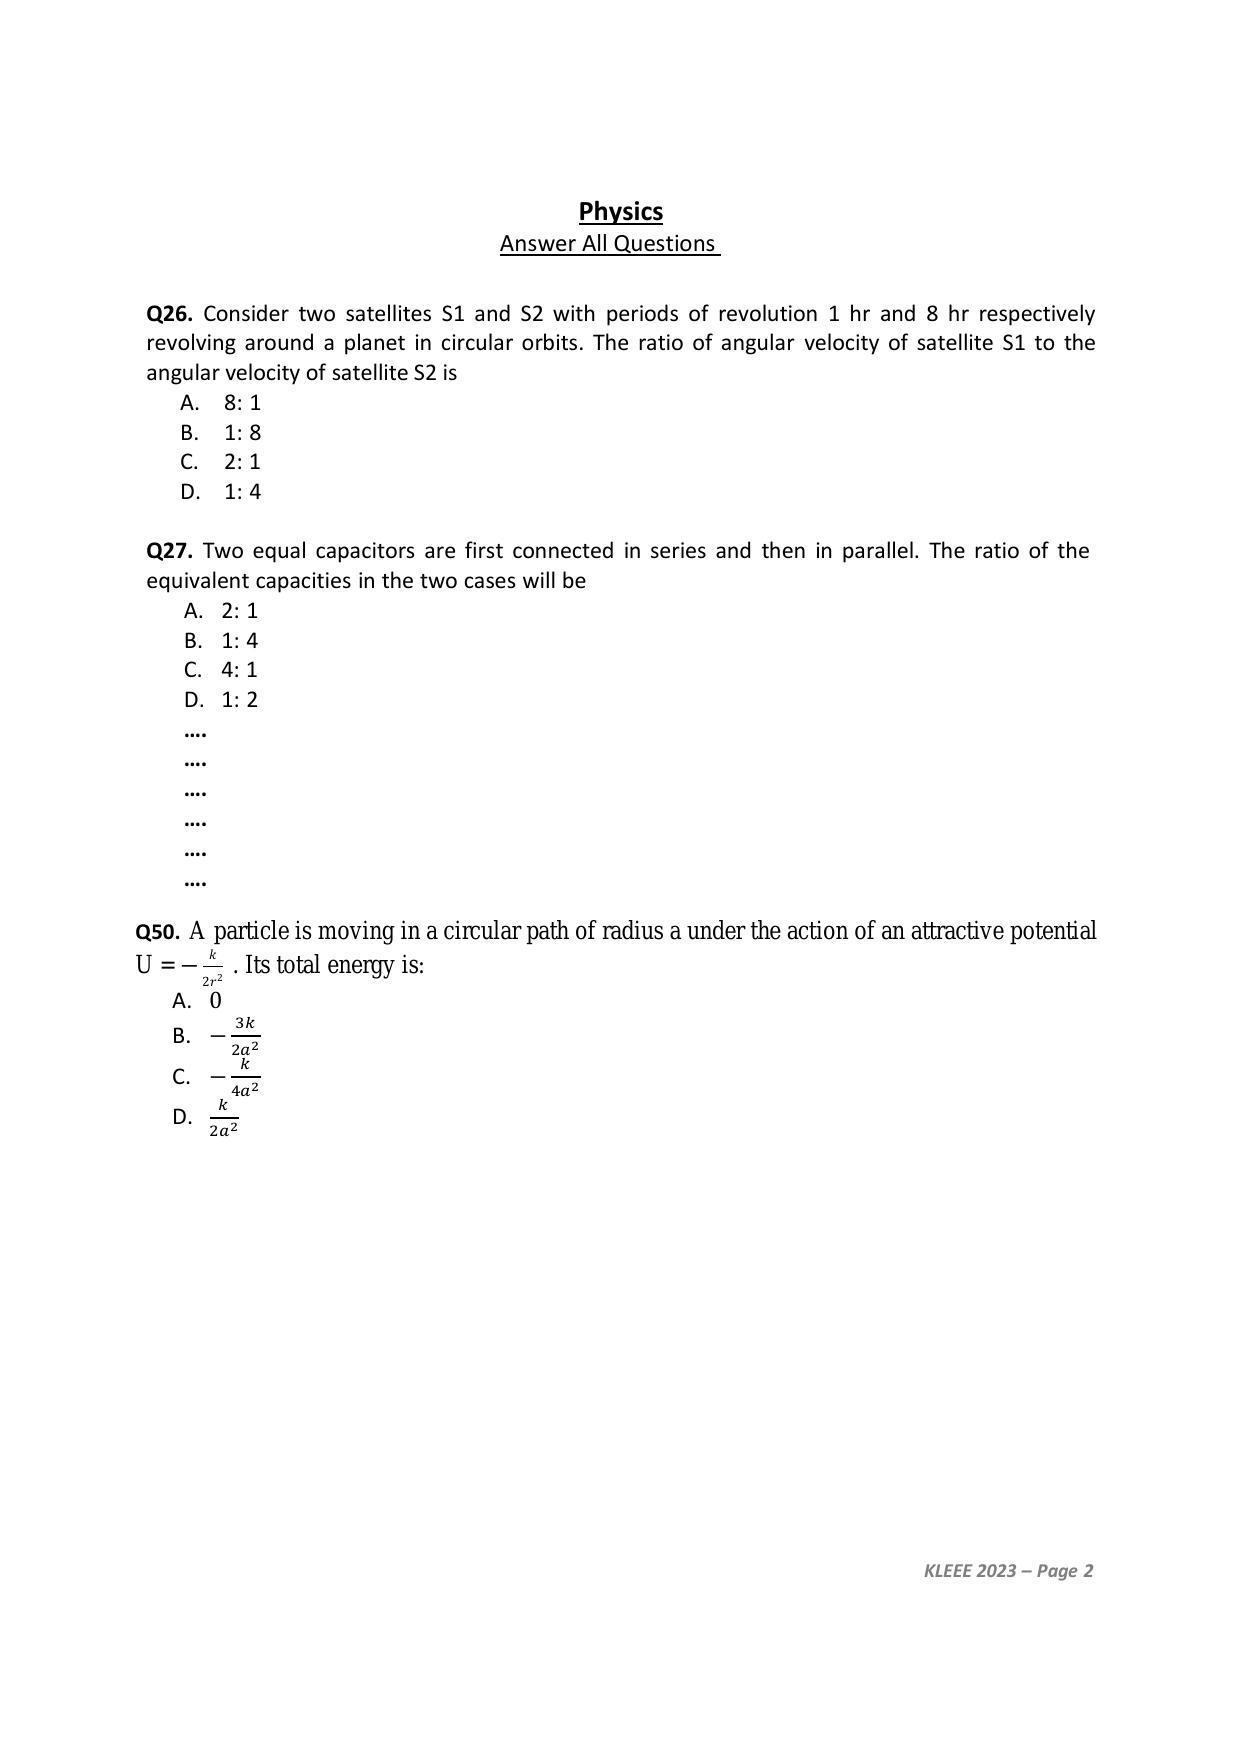 KLEEE 2023 Model Question Paper  - Page 2